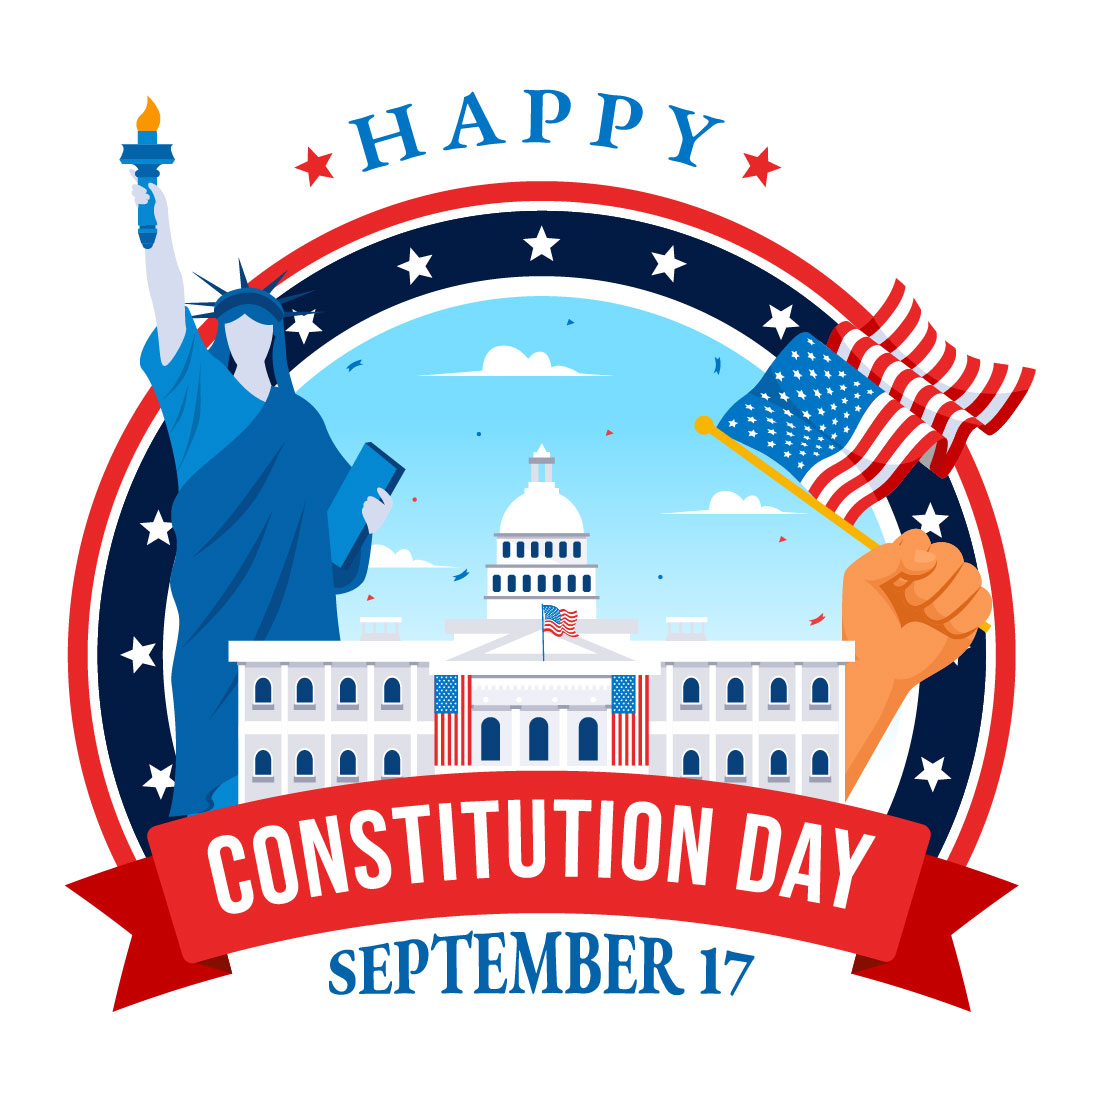 12 Constitution Day United States Illustration cover image.